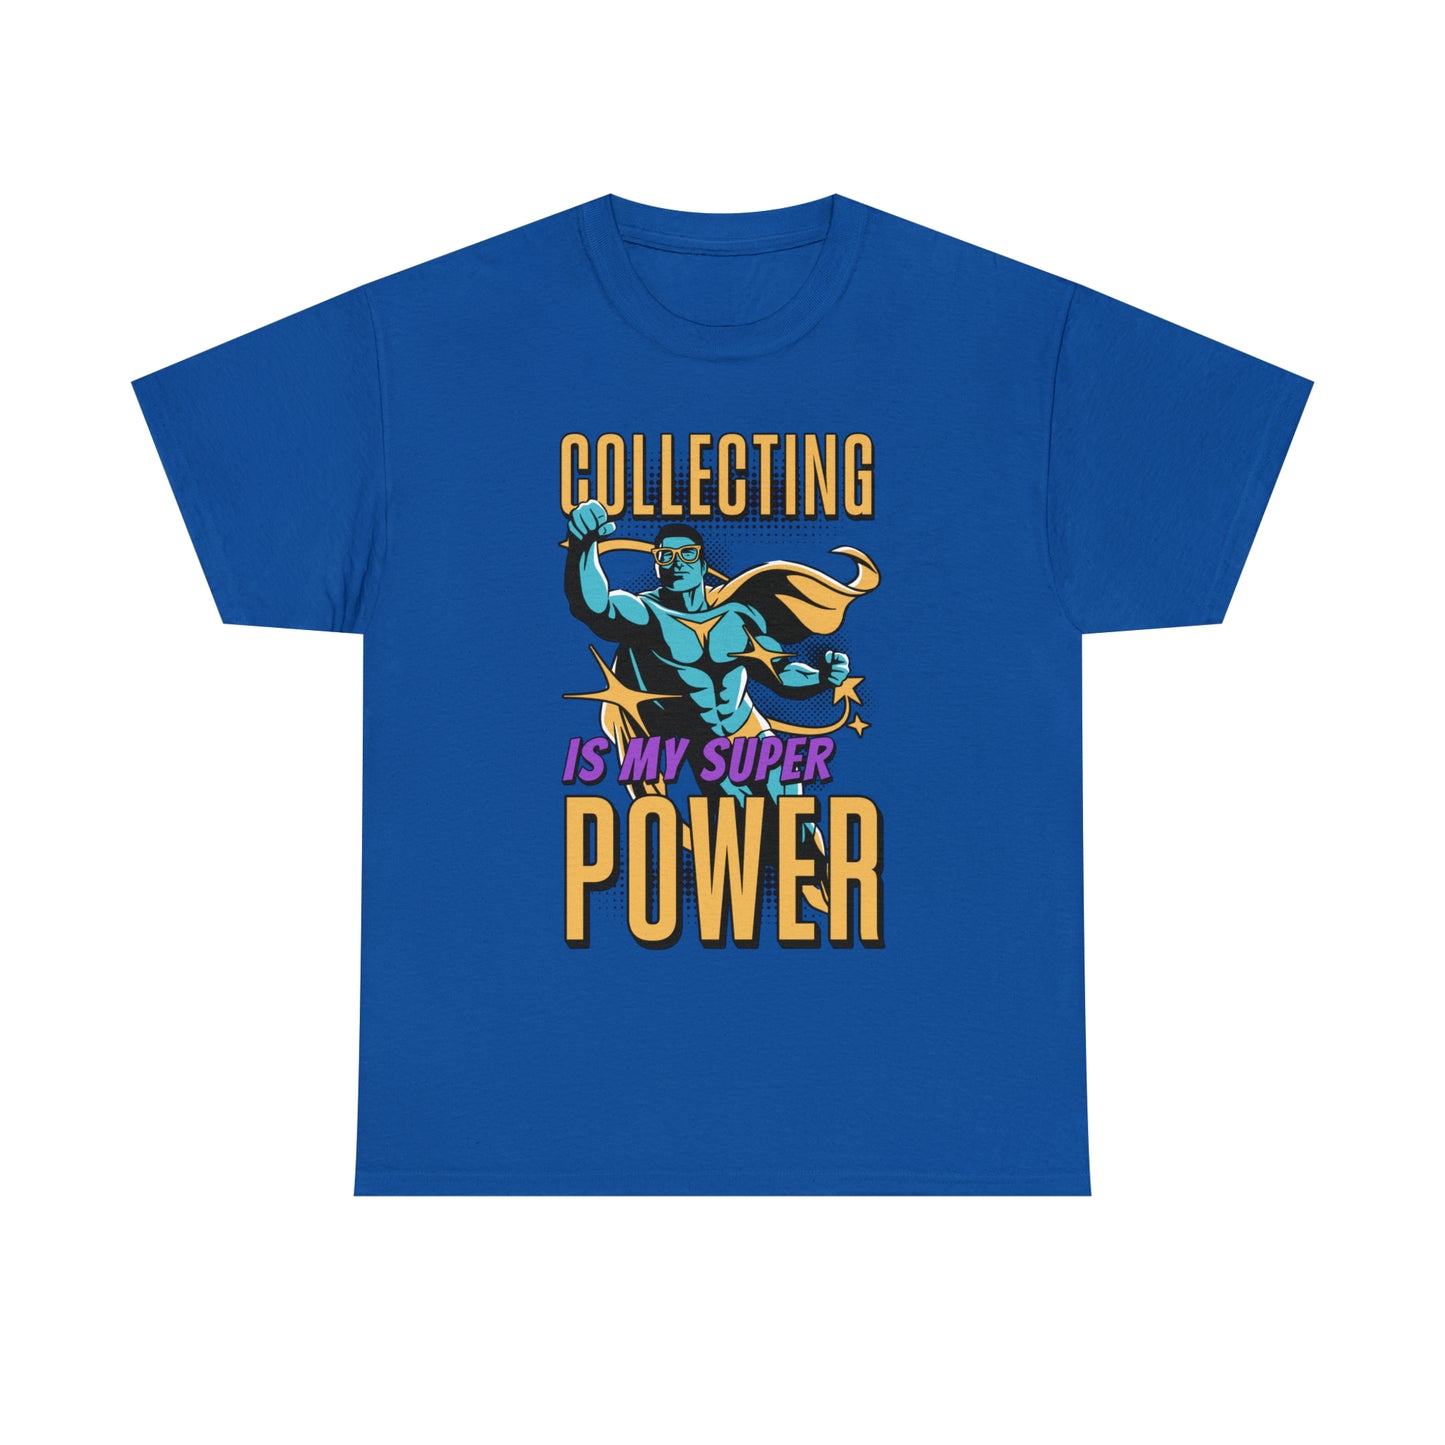 Sports Cards "Collecting Is My Superpower" Unisex Cotton Tee for Collectors T-Shirt